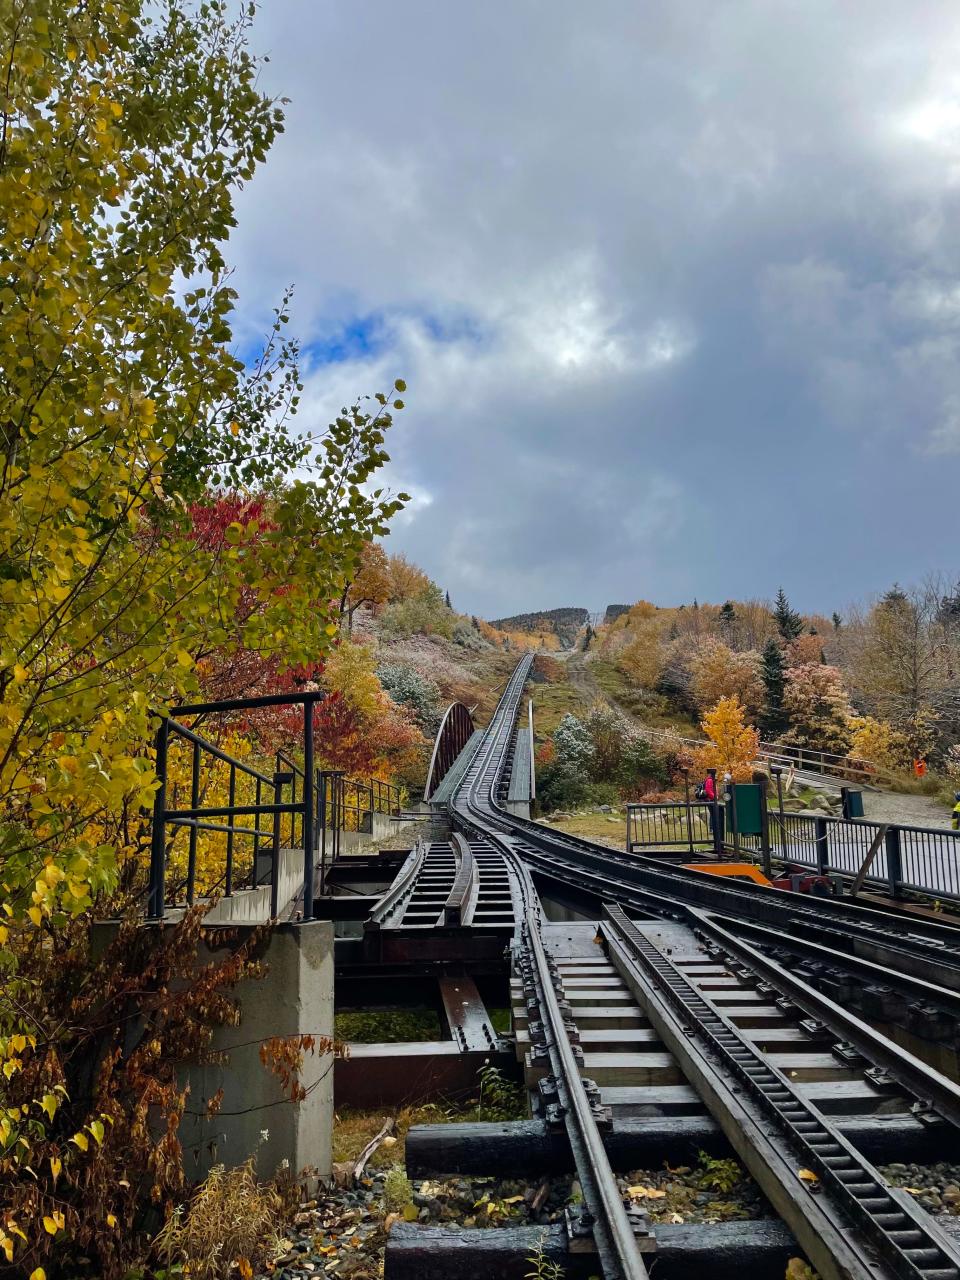 View of train tracks backdropped by fall foliage